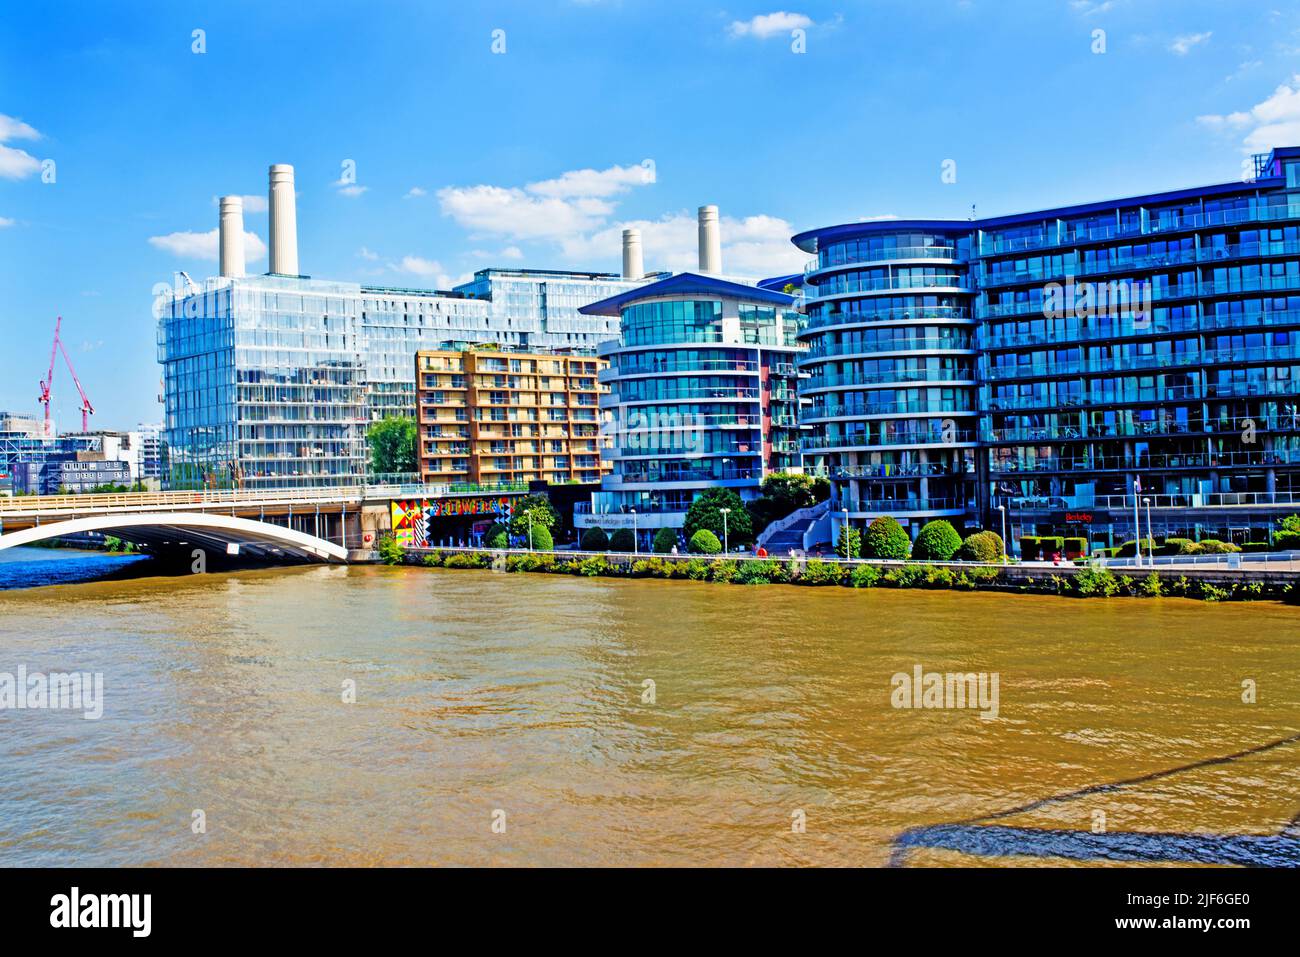 Rejuvenation and Appartments around Battersea power Station, London, England Stock Photo